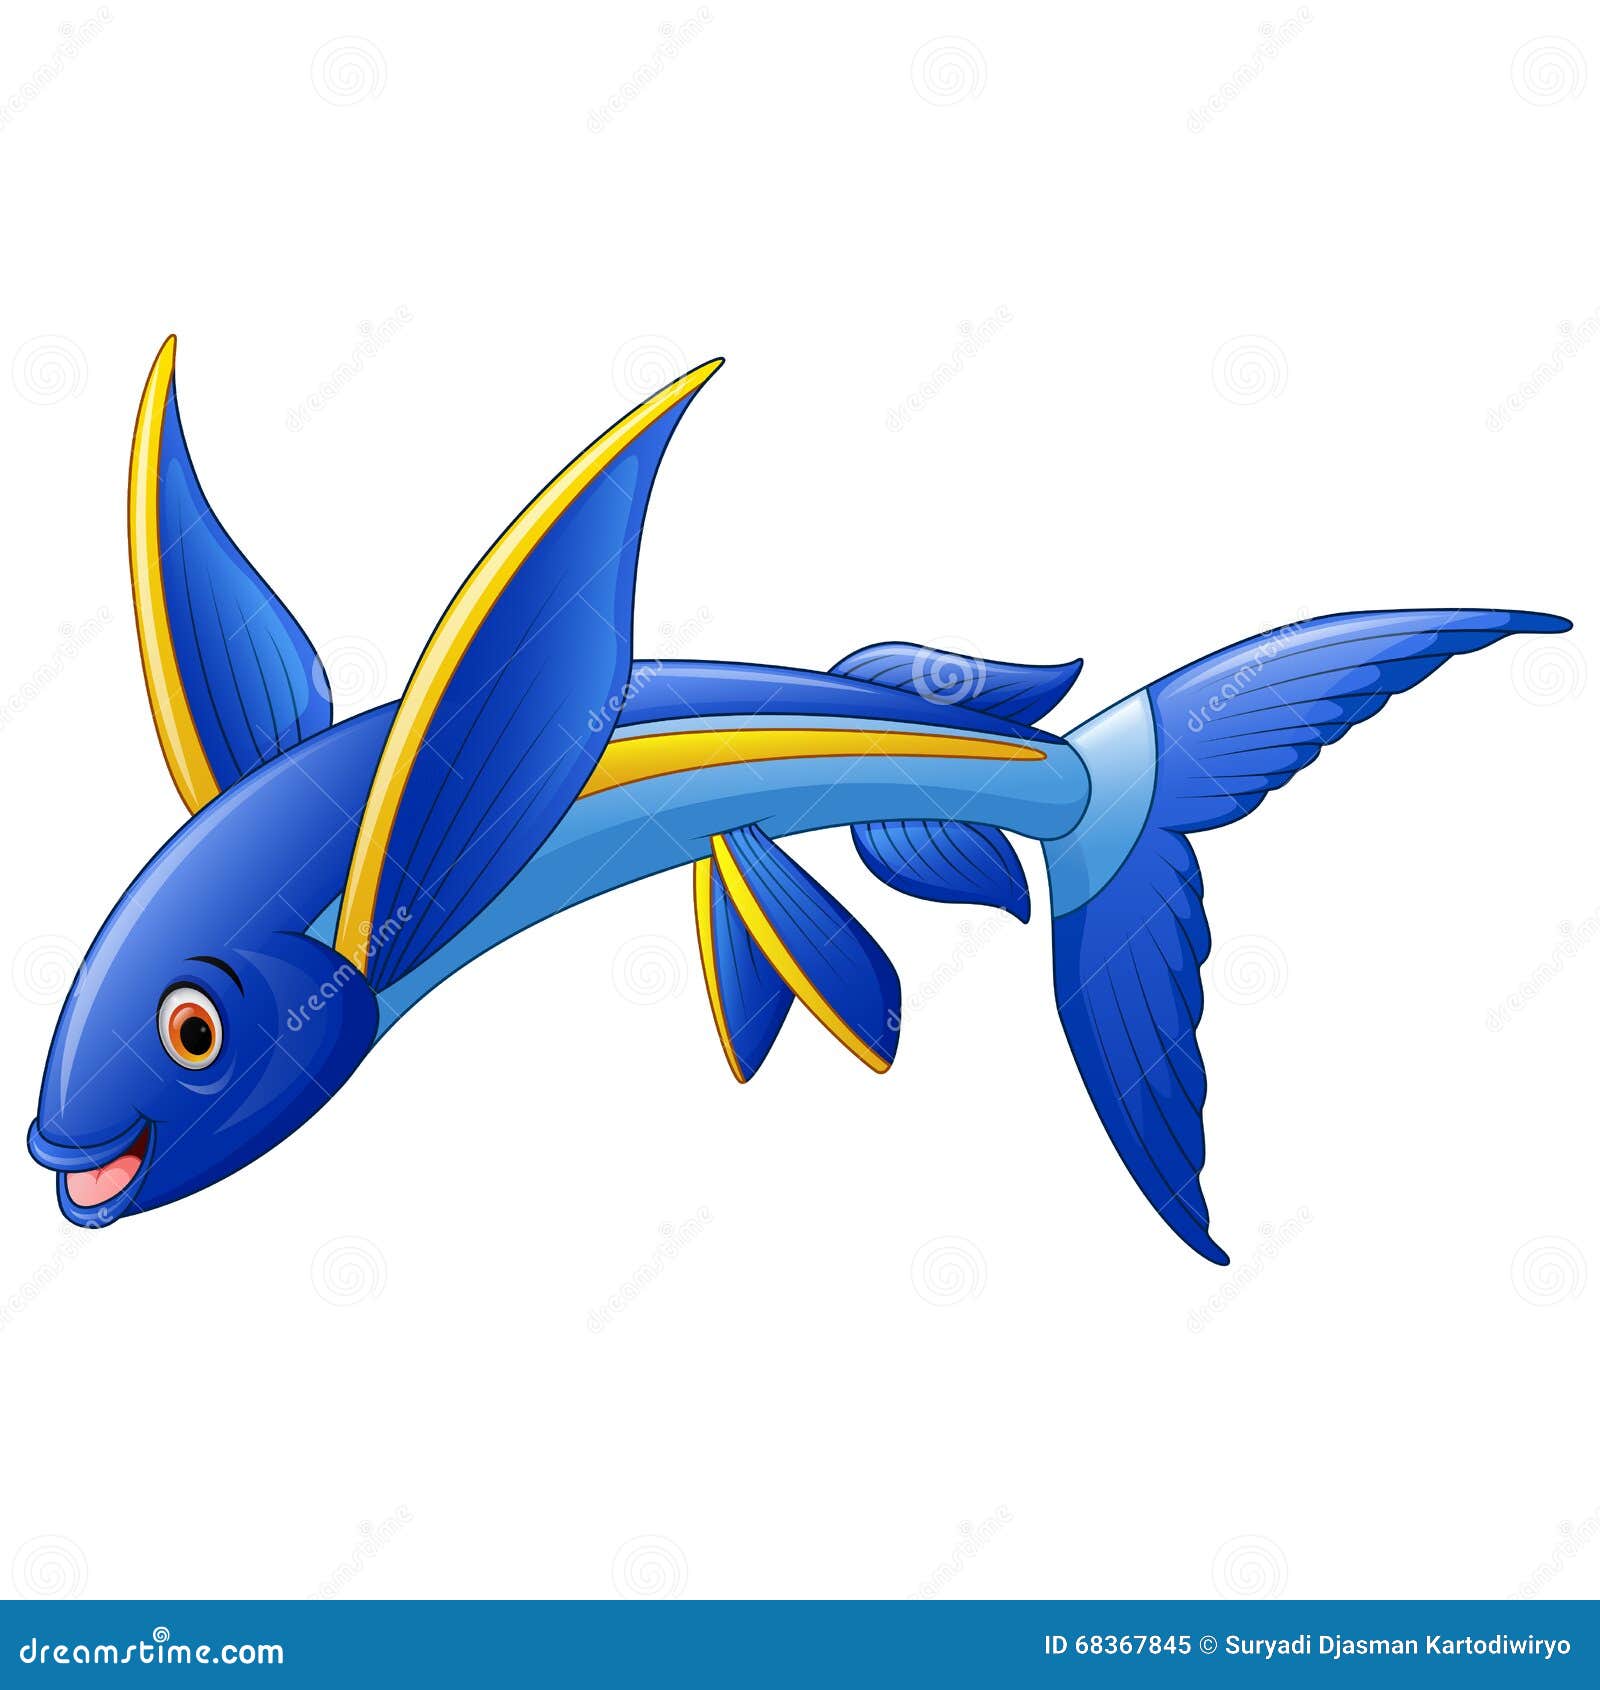 clipart flying fish - photo #28